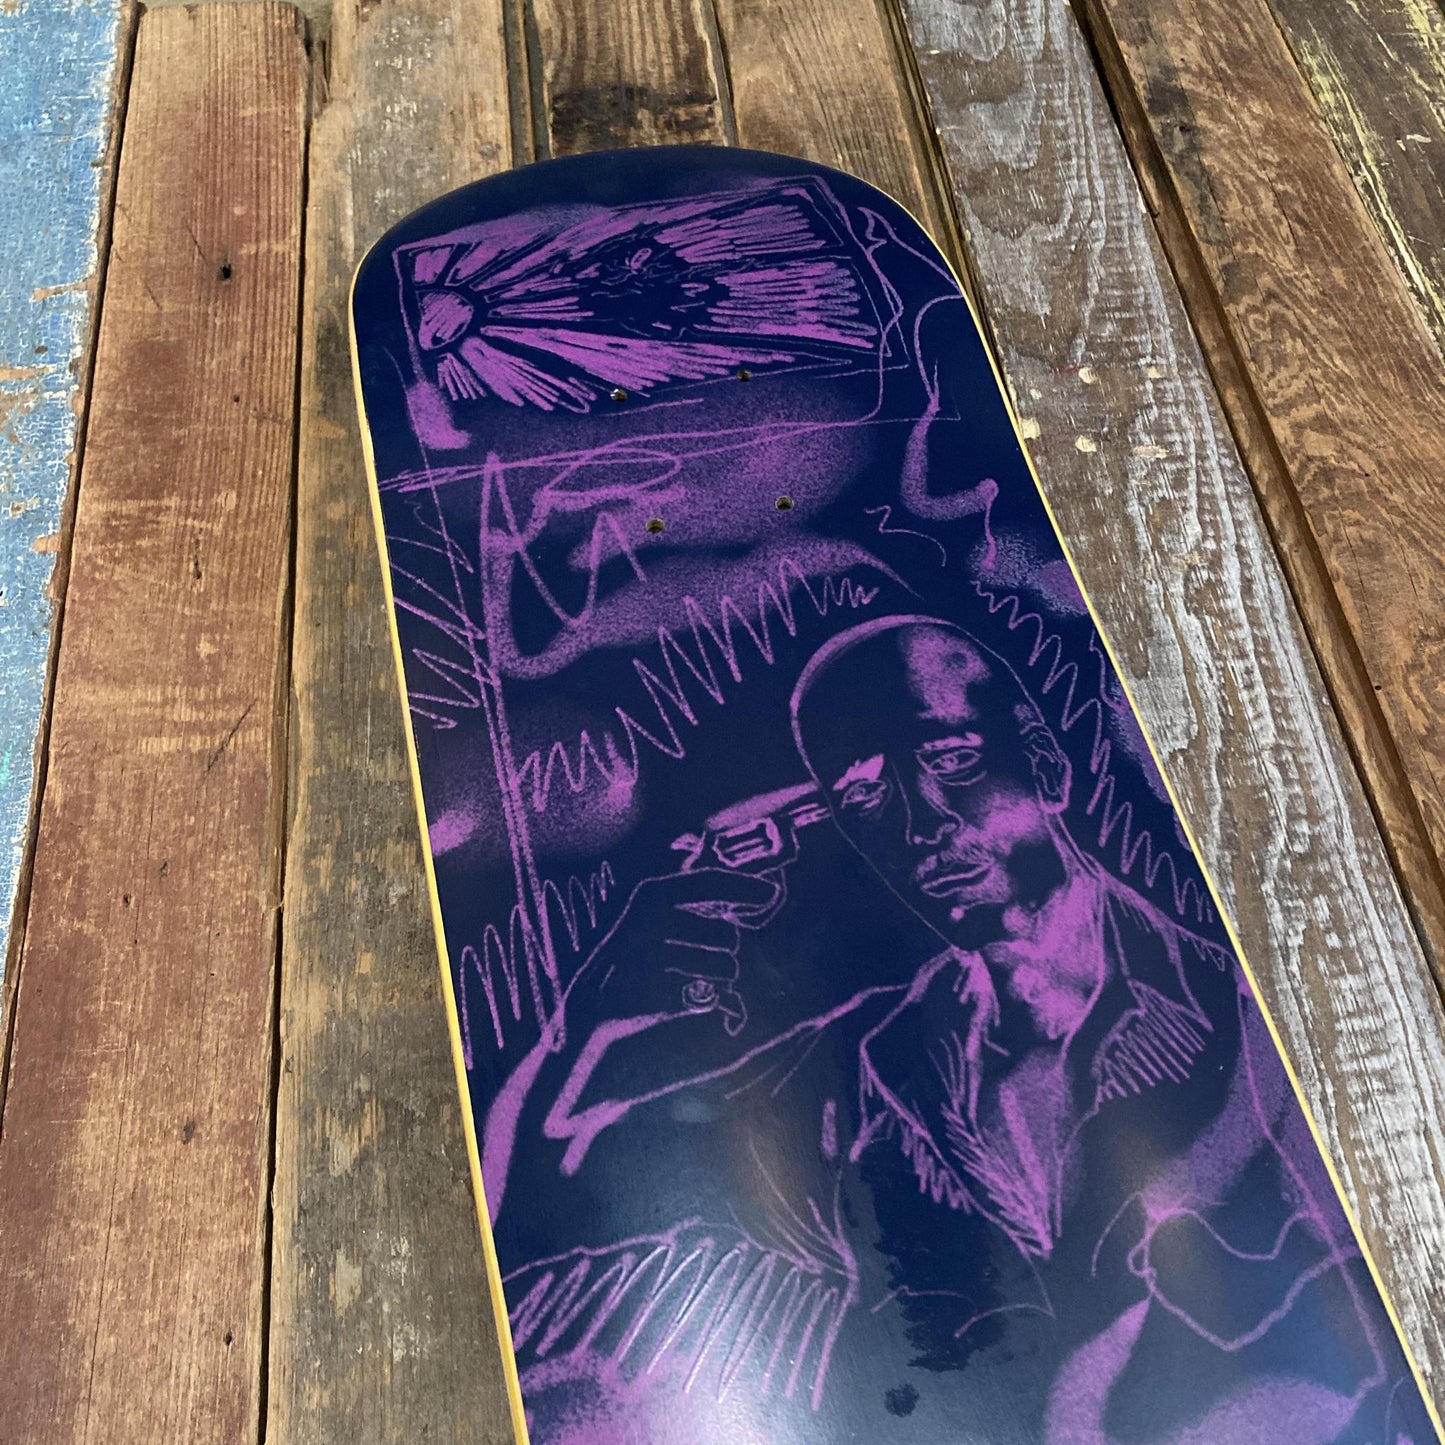 UNISEX VAL BAUER PRO BOARD WOOD MOLD H - 8.25